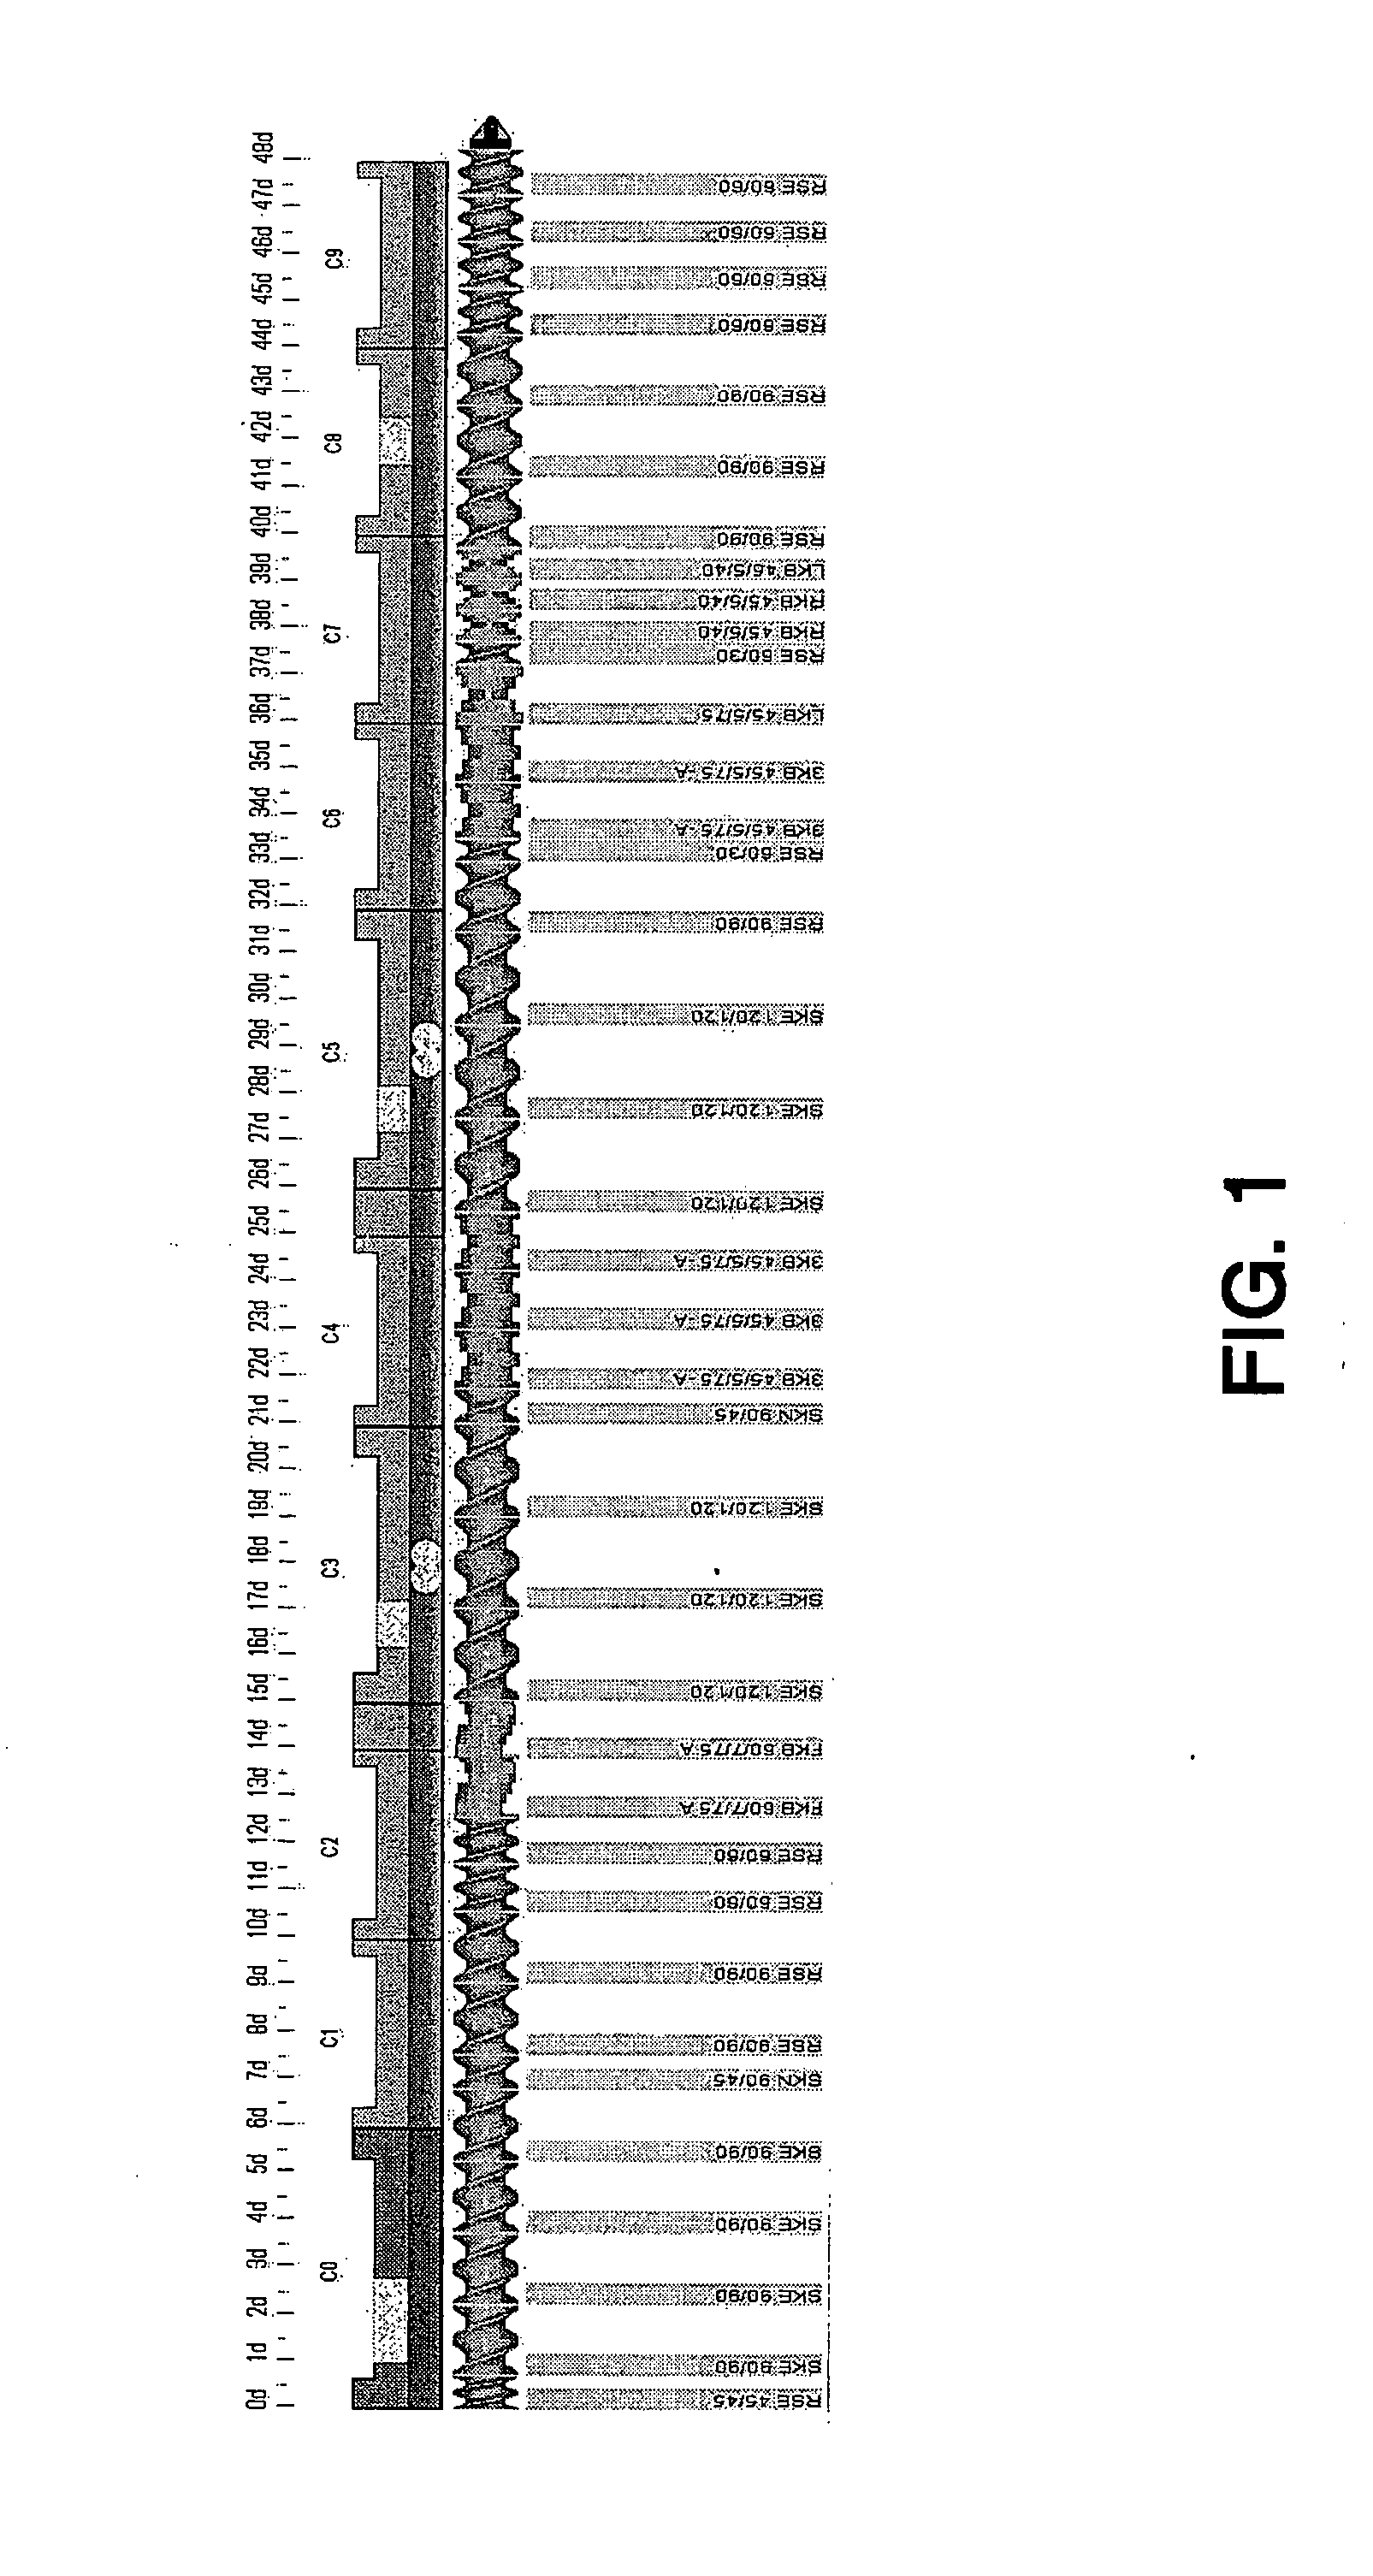 Biodegradable polymer masterbatch, and a composition derived therefrom having improved physical properties